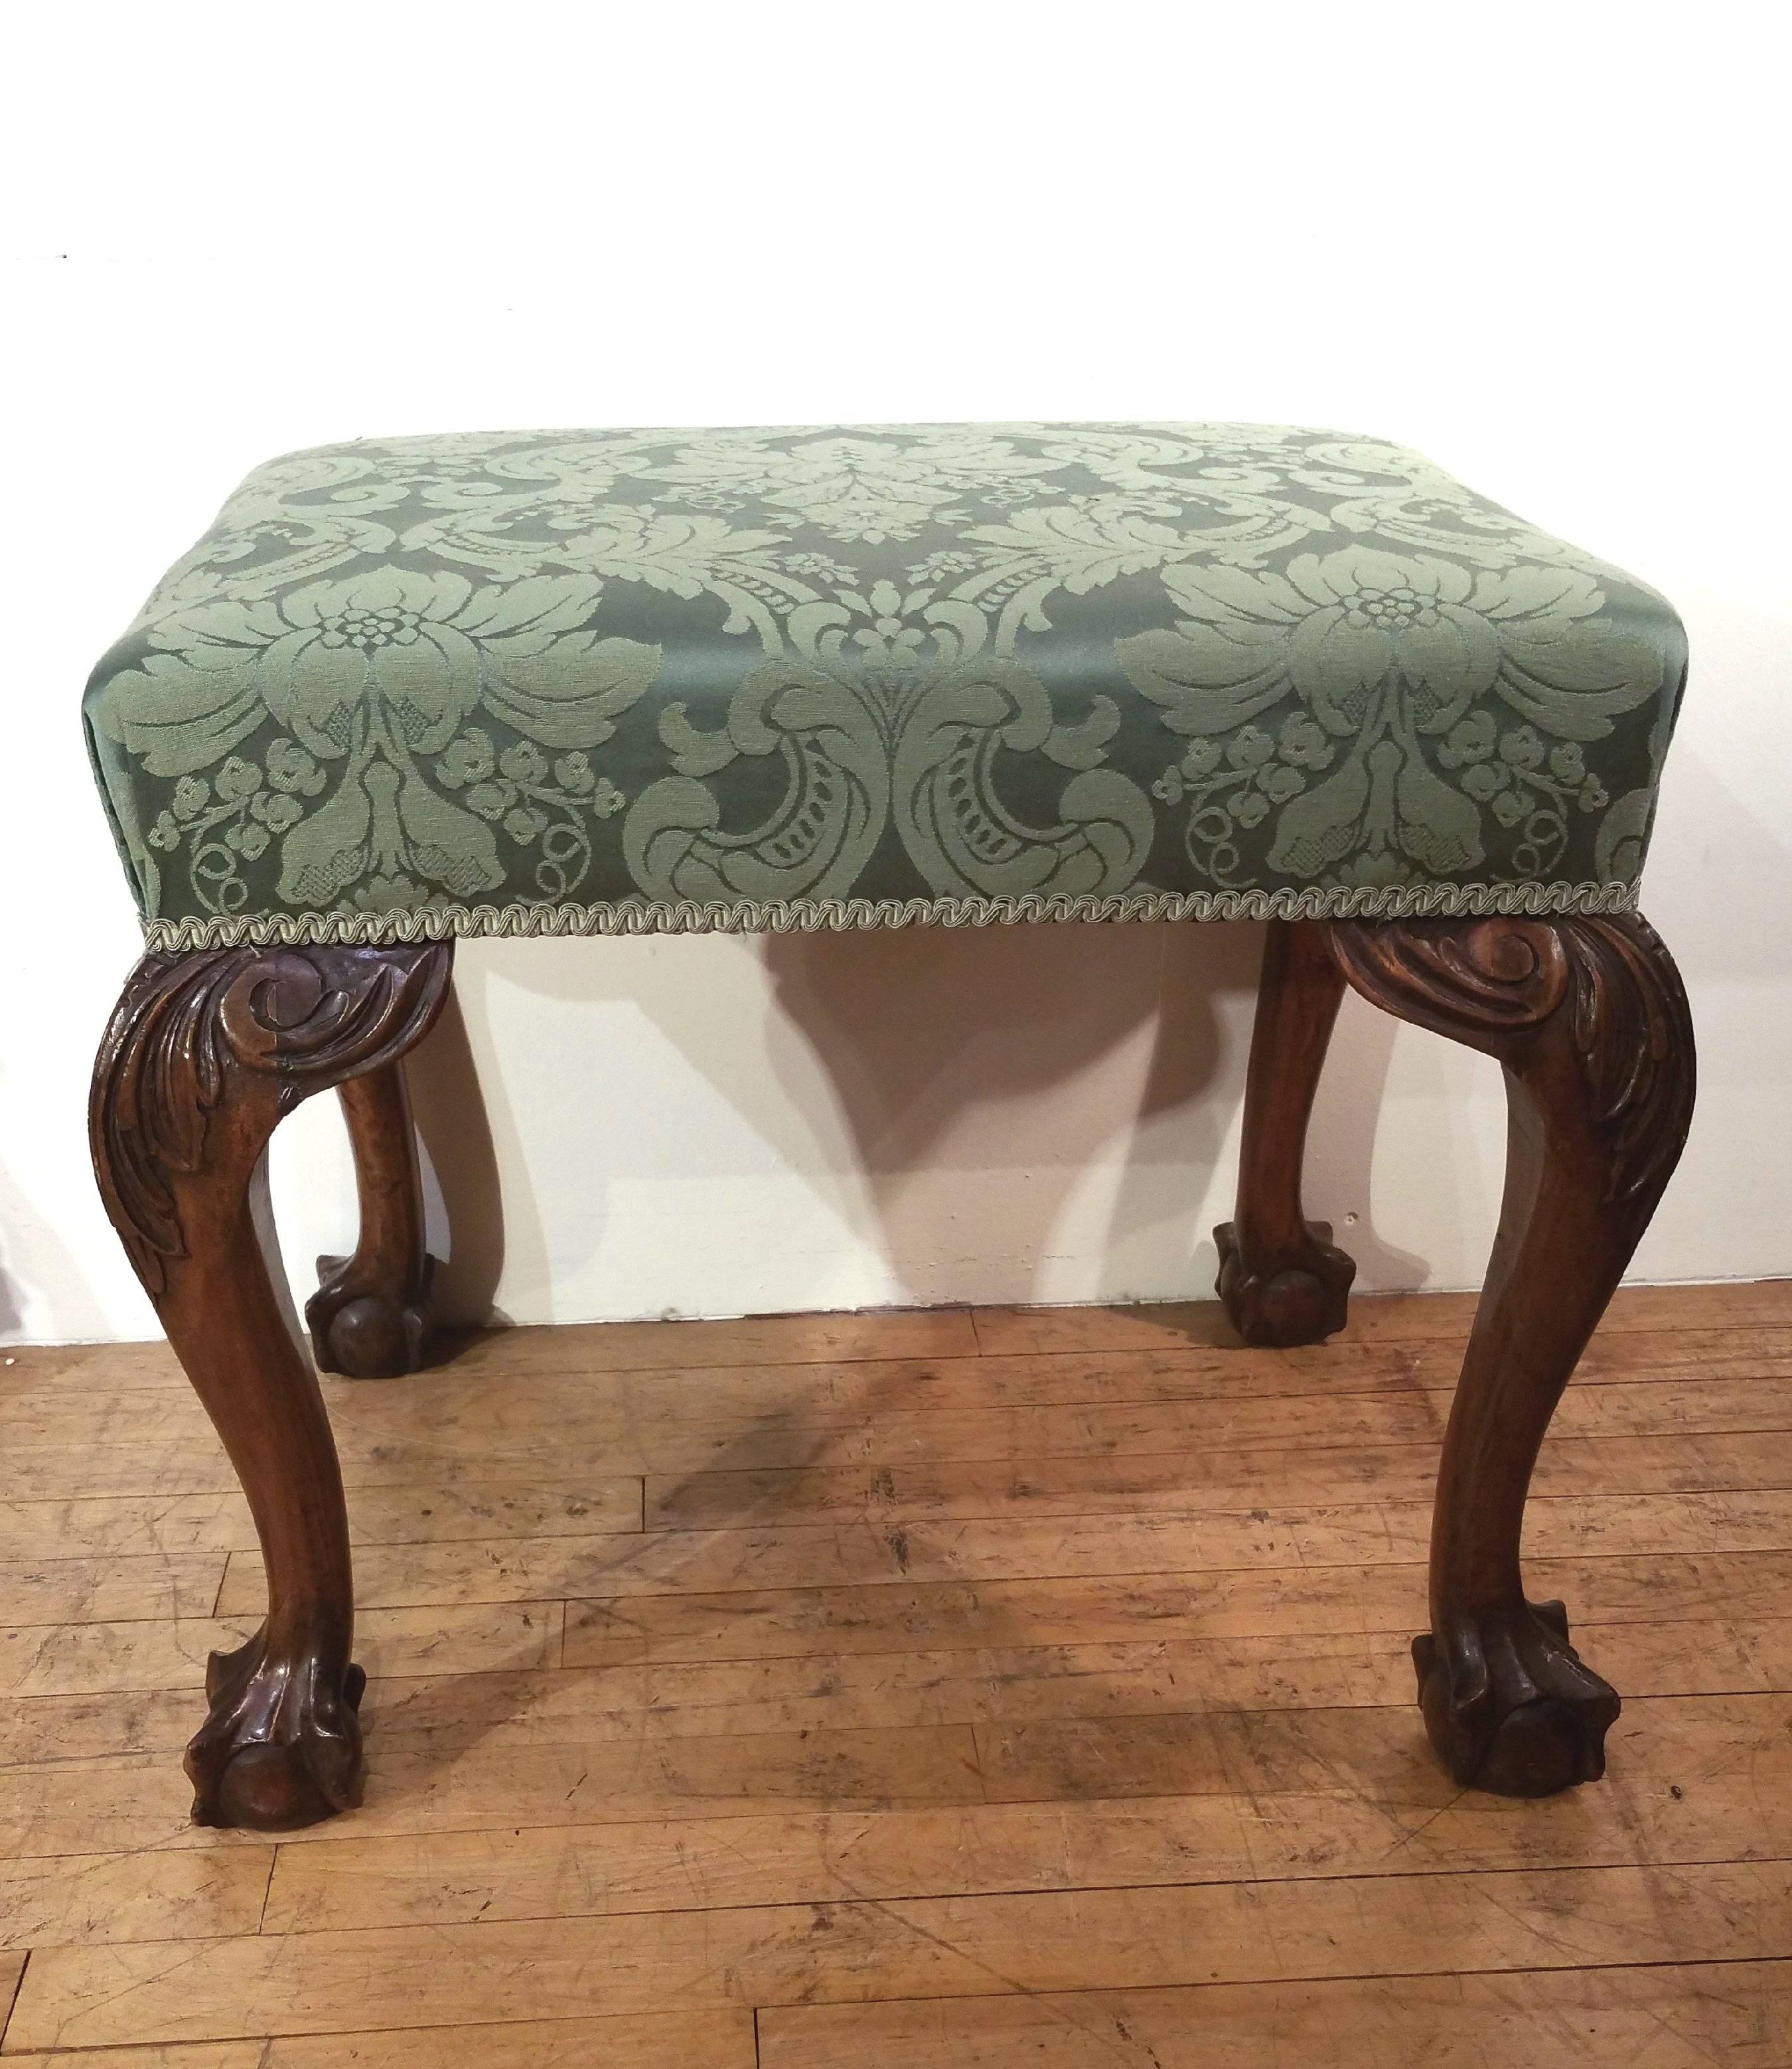 This elegant and well-proportioned carved walnut English stool is in the Chippendale style with ornately carved acanthus leaves on cabriole legs with ball and claw feet. The stool measures 23 ½ in – 59.7 cm wide by 18 ½ in – 47 cm deep with a height